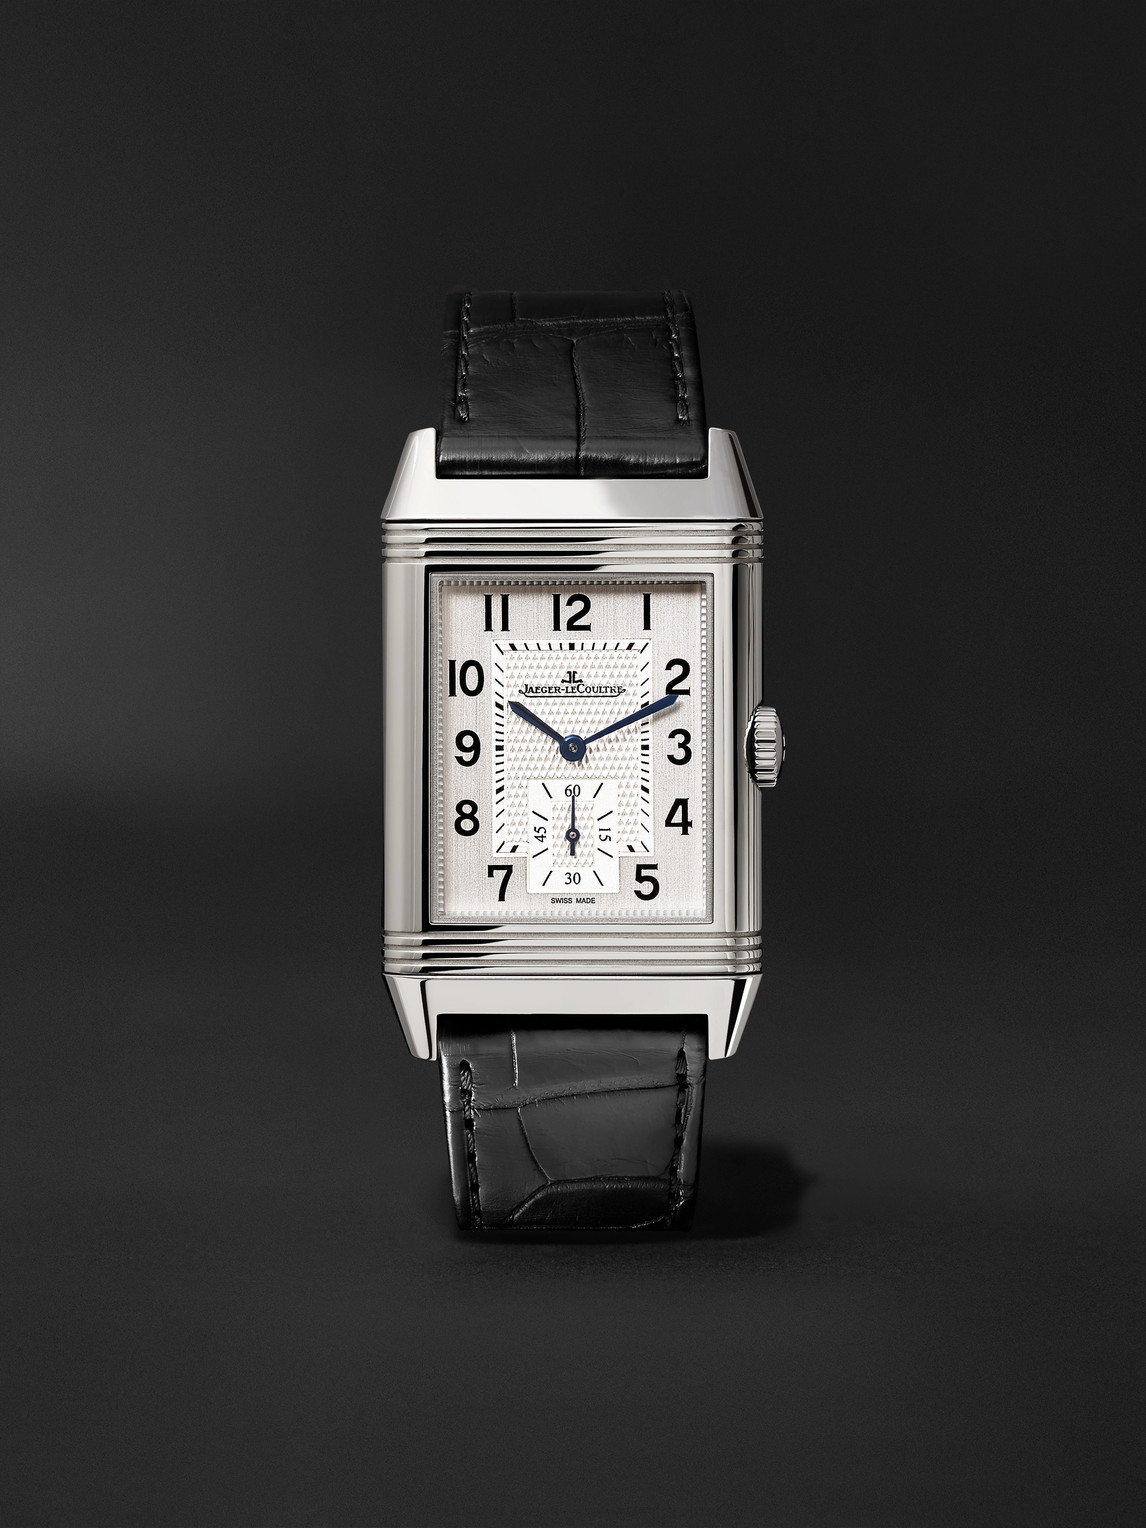 Jaeger-lecoultre Reverso Classic Large Hand-wound 45mm X 27mm Stainless Steel And Alligator Watch, Ref. No. Q3858520 In White